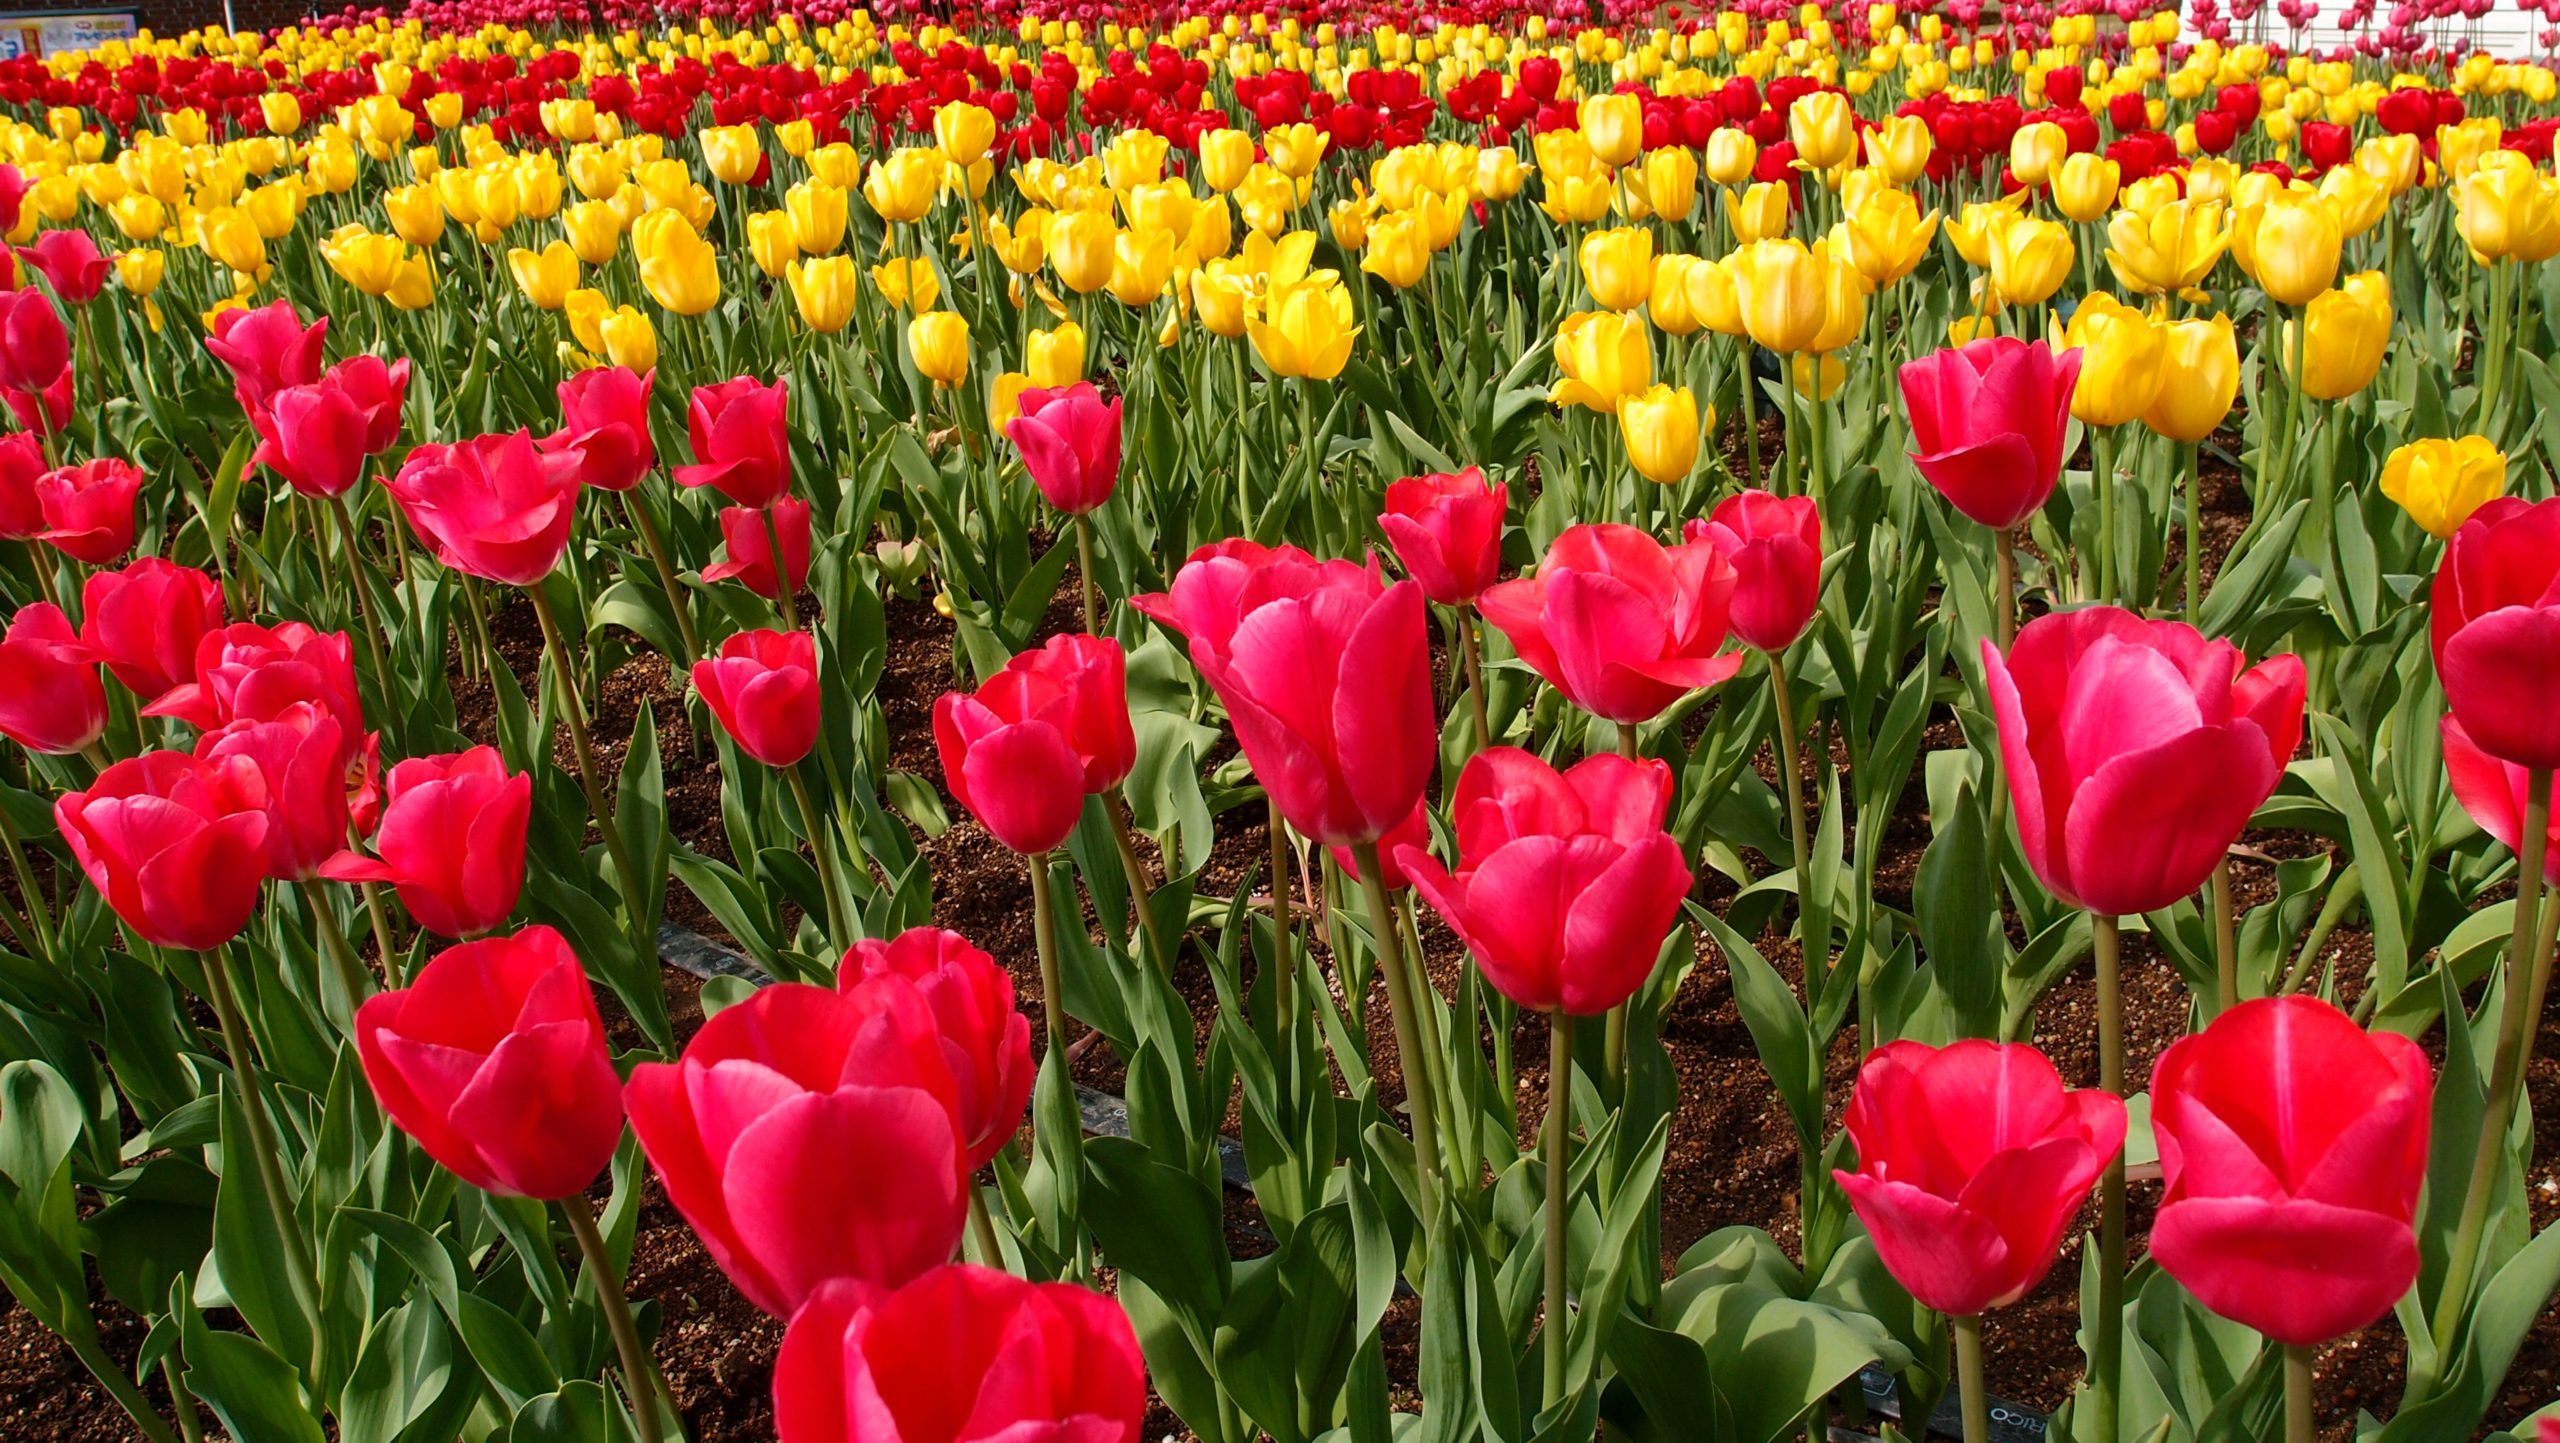 Large tulip field with red and yellow tulips in lines alternating